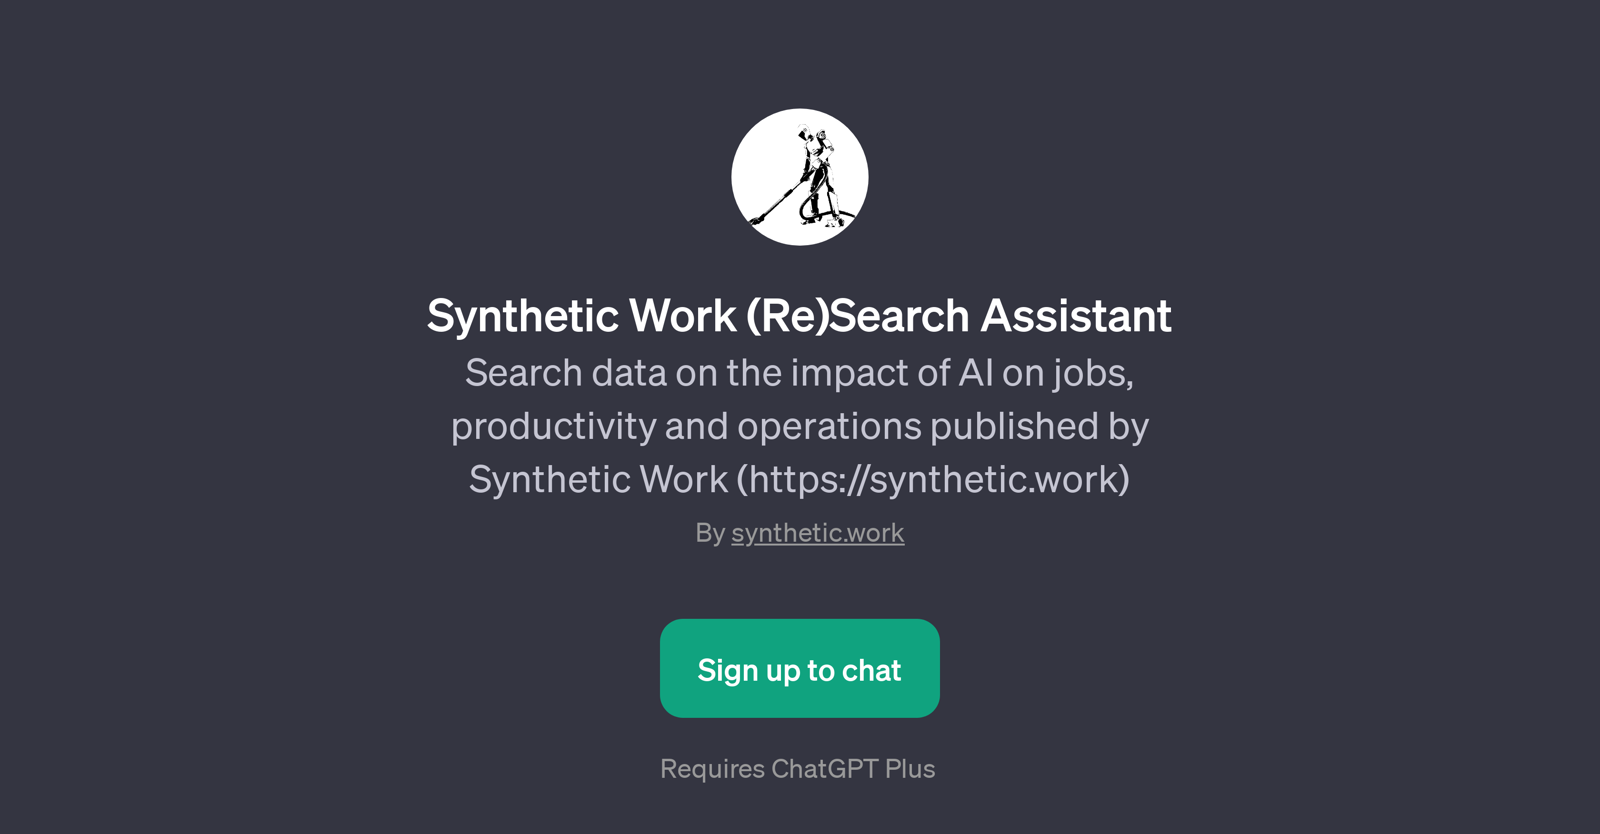 Synthetic Work (Re)Search Assistant website